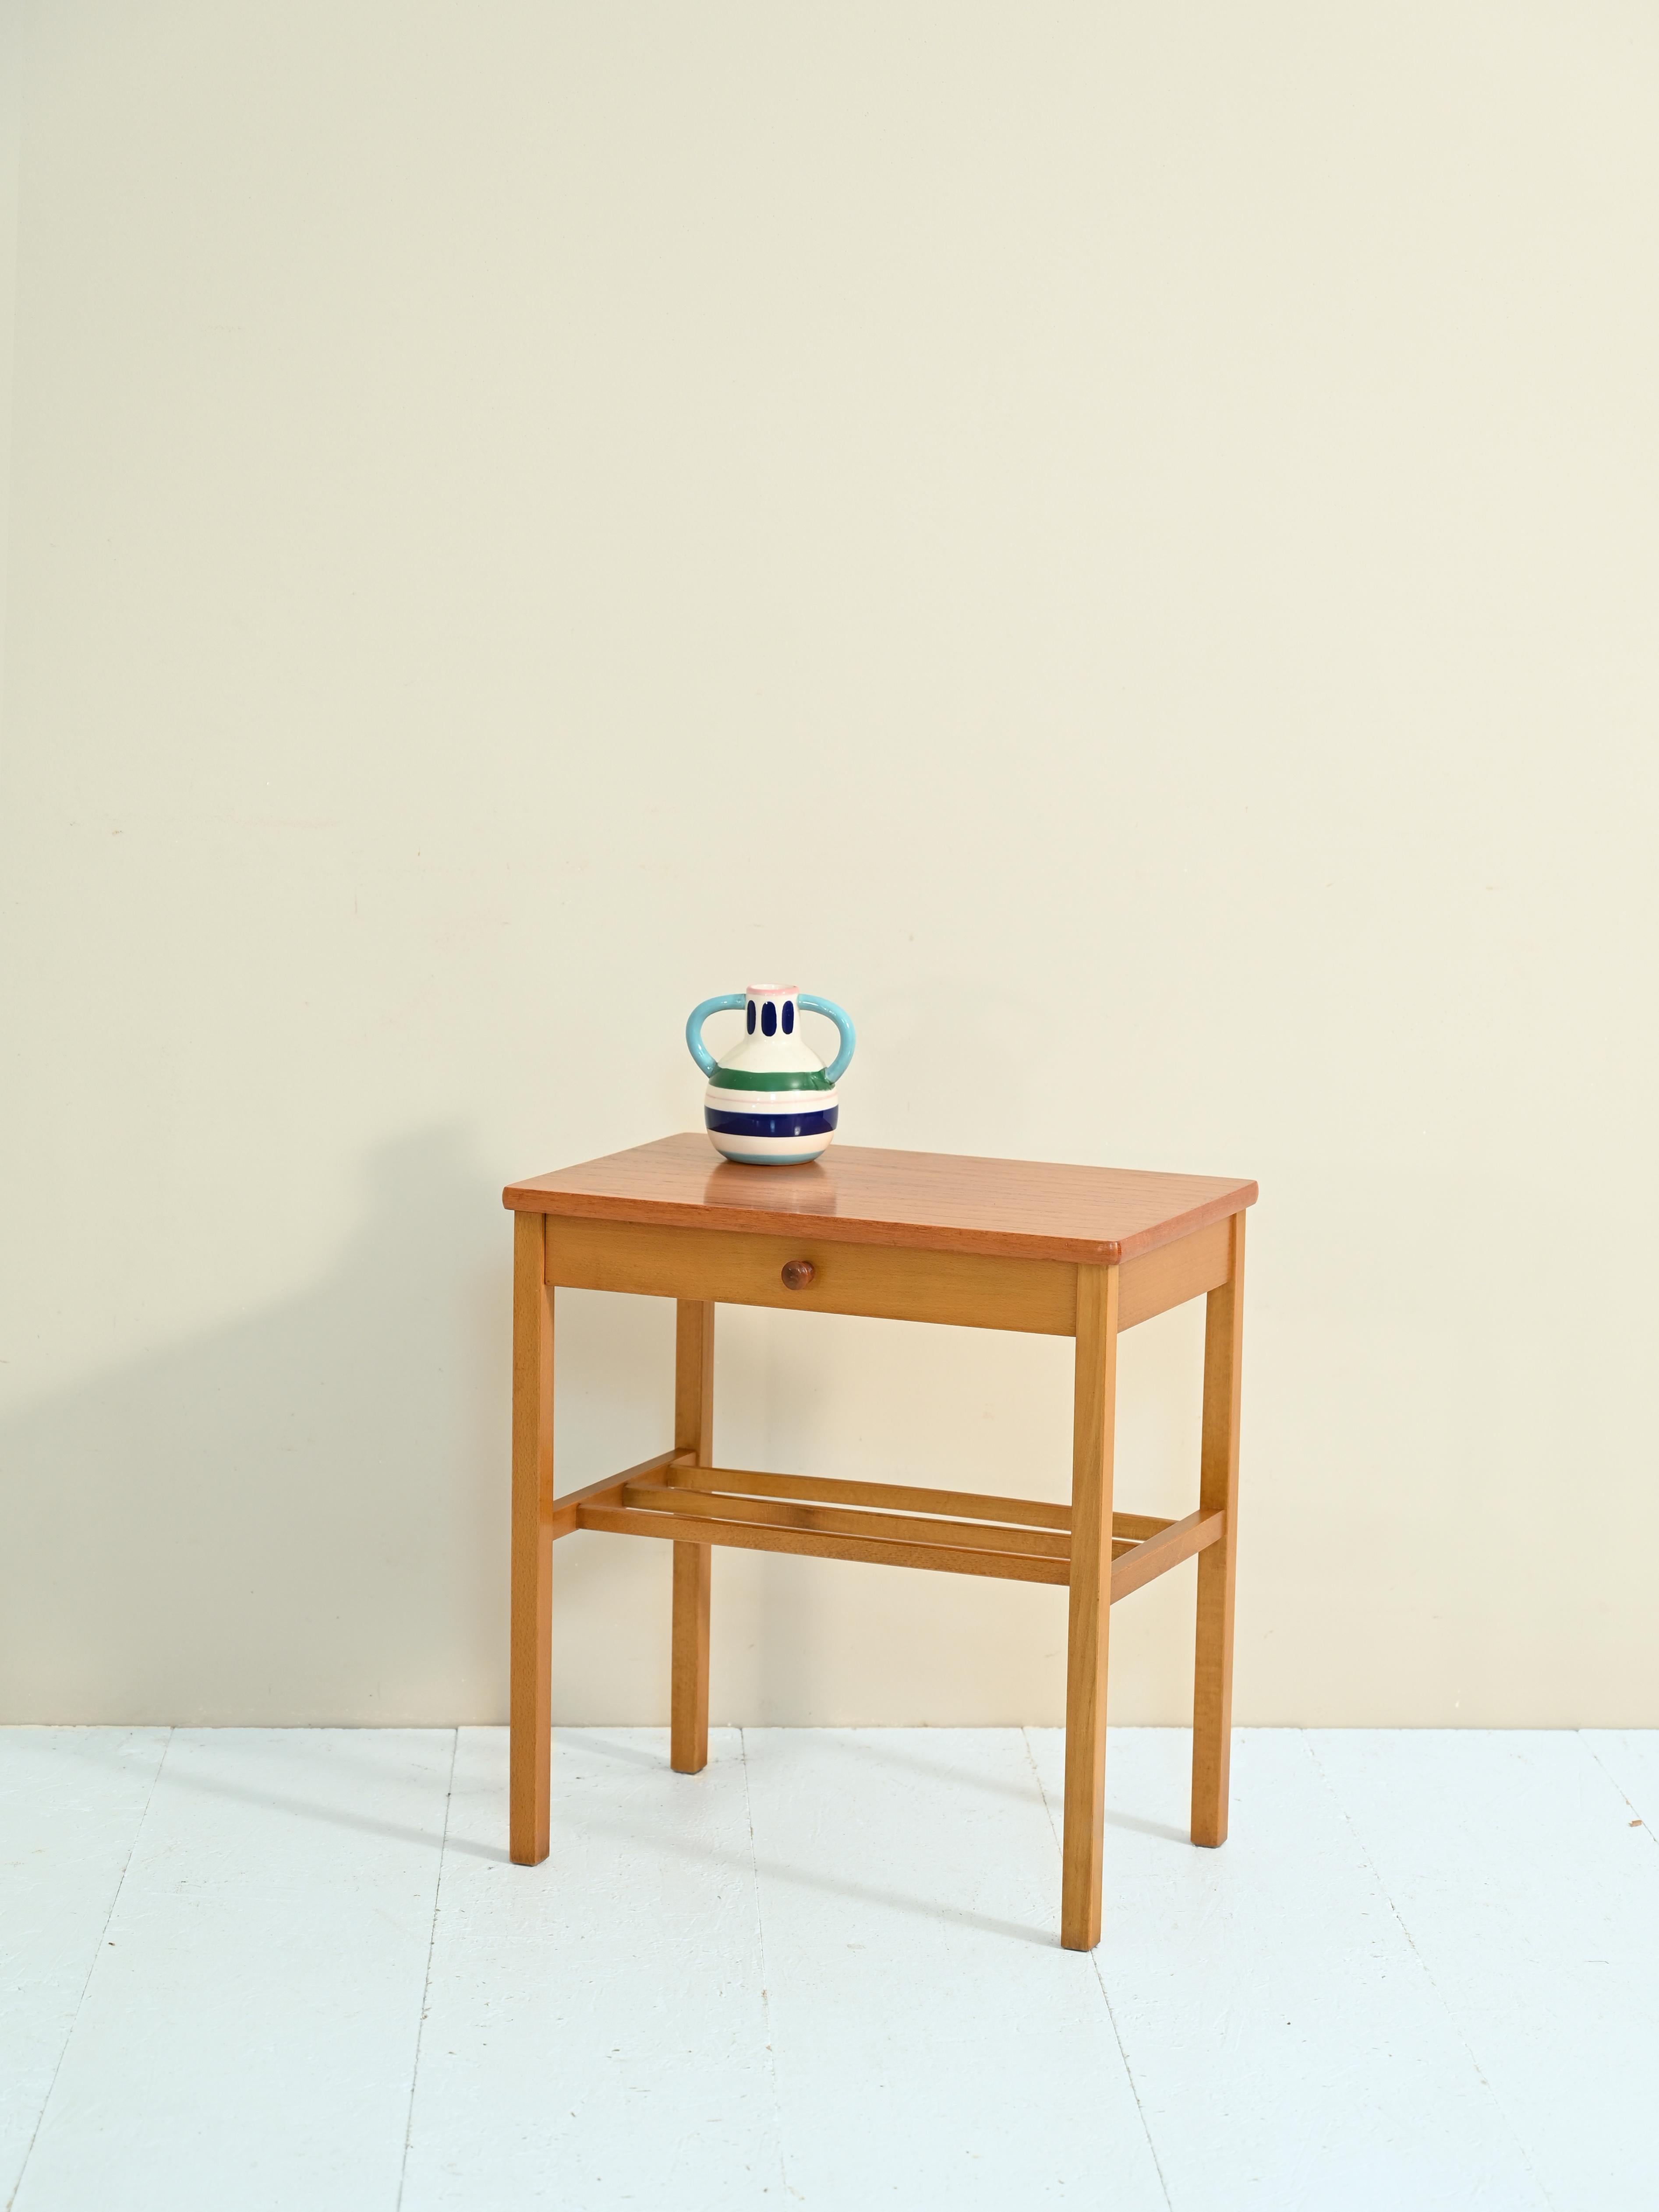 Teak bedside table with typical mid-century Scandinavian forms.

The stem is formed by a thin drawer supported by the long wooden legs.

This elegant bedside table is perfect for giving a northern European touch to a bedroom or can be placed at